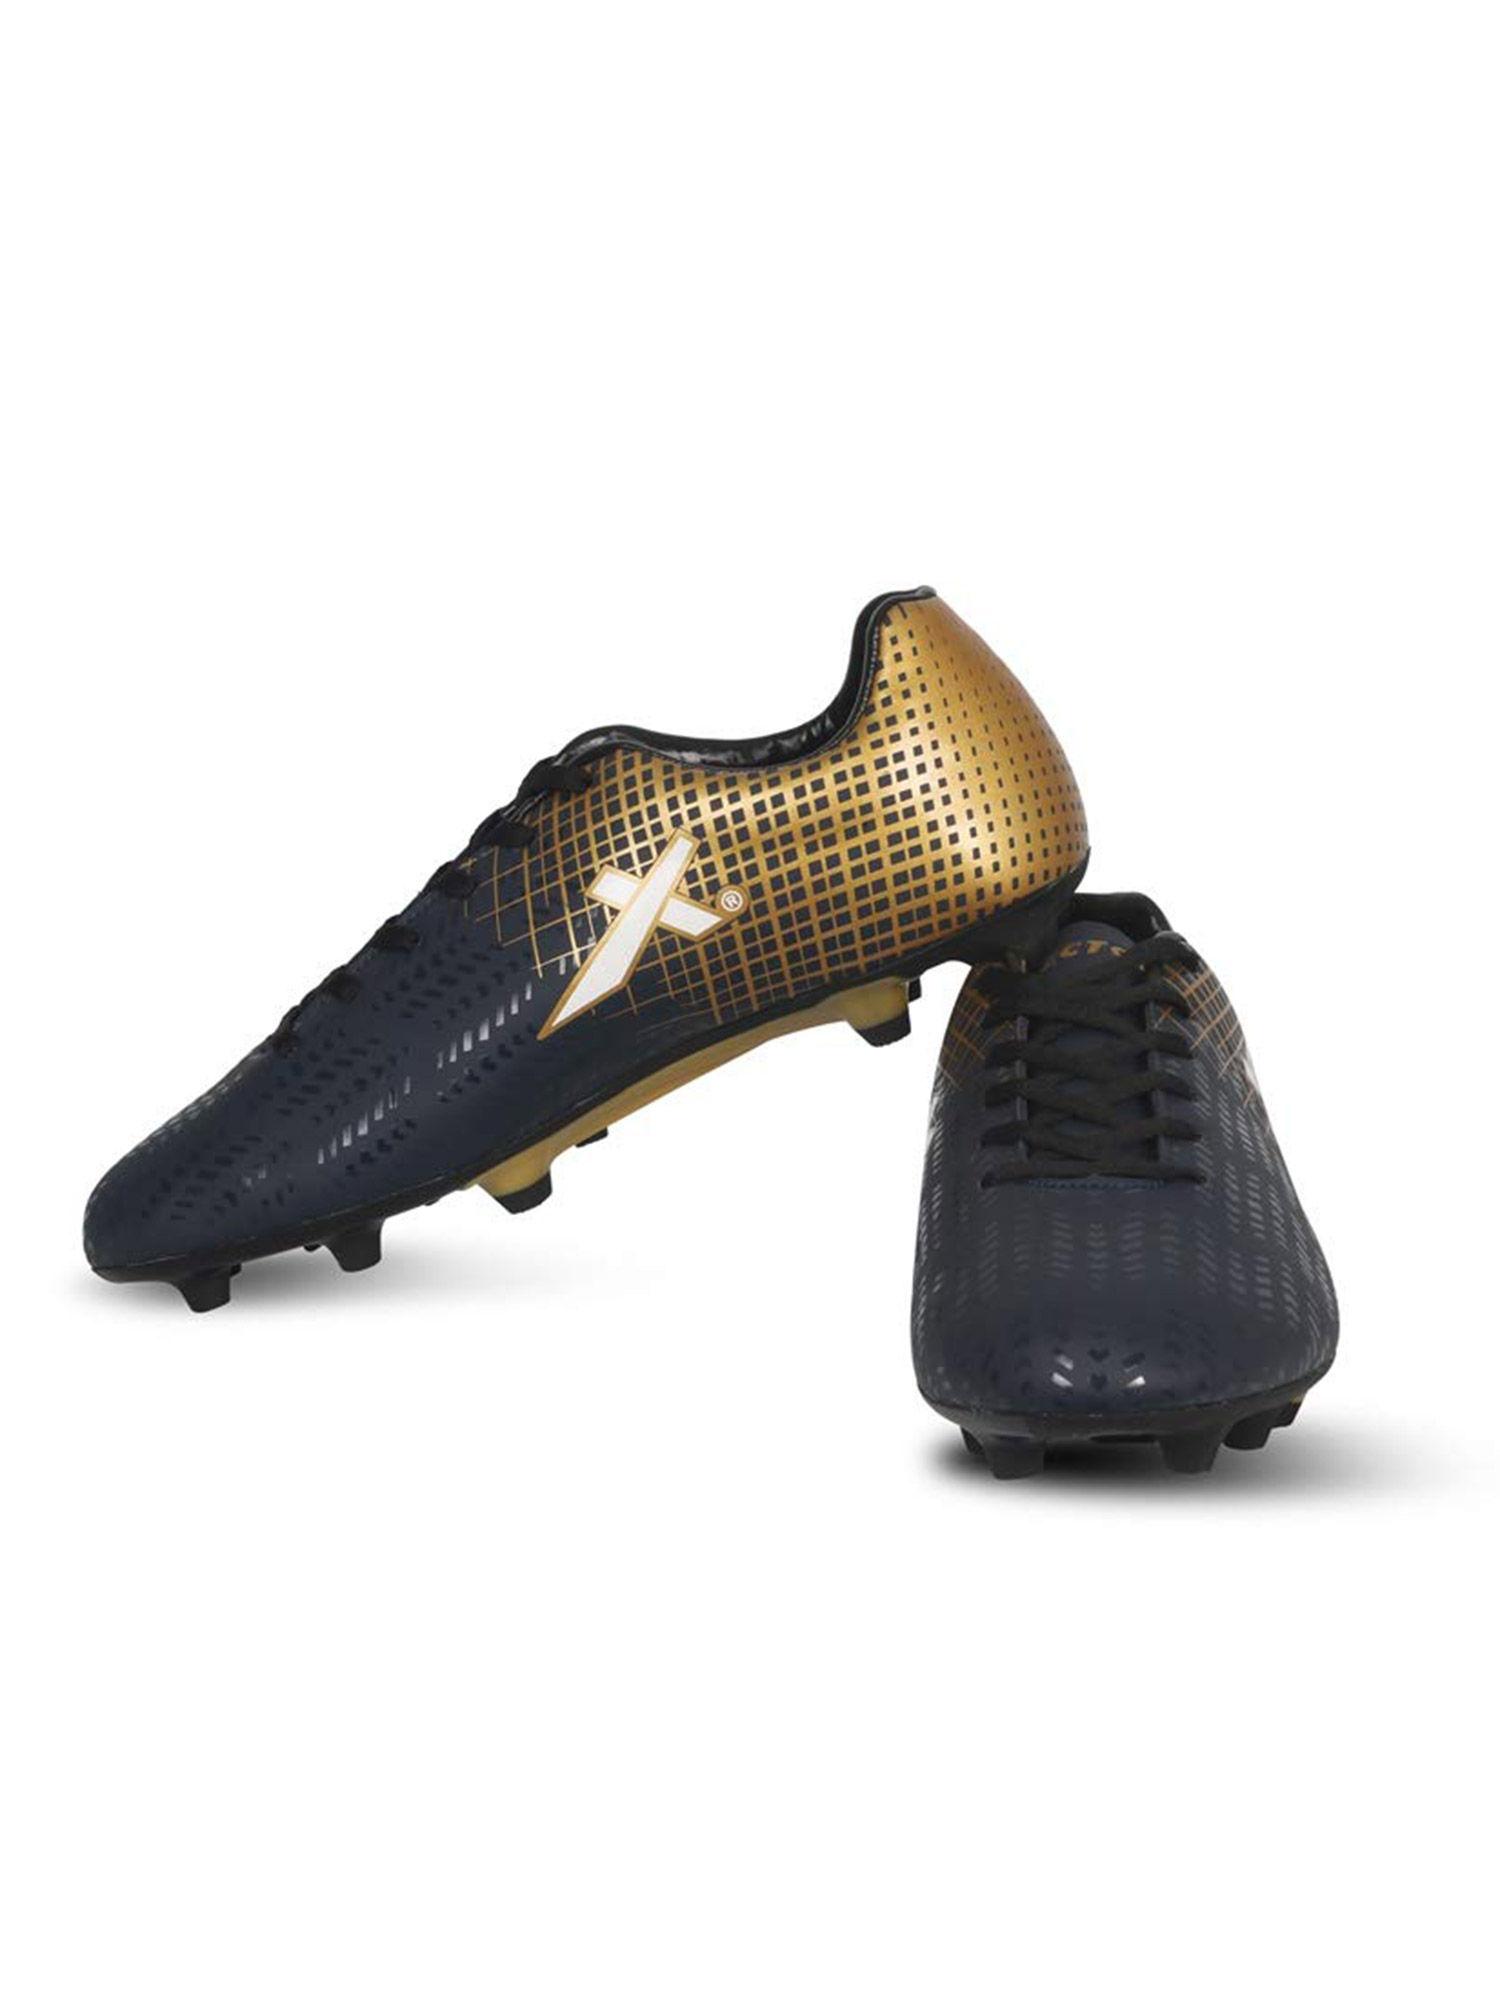 ozone-football-shoes-for-men---navy---gold